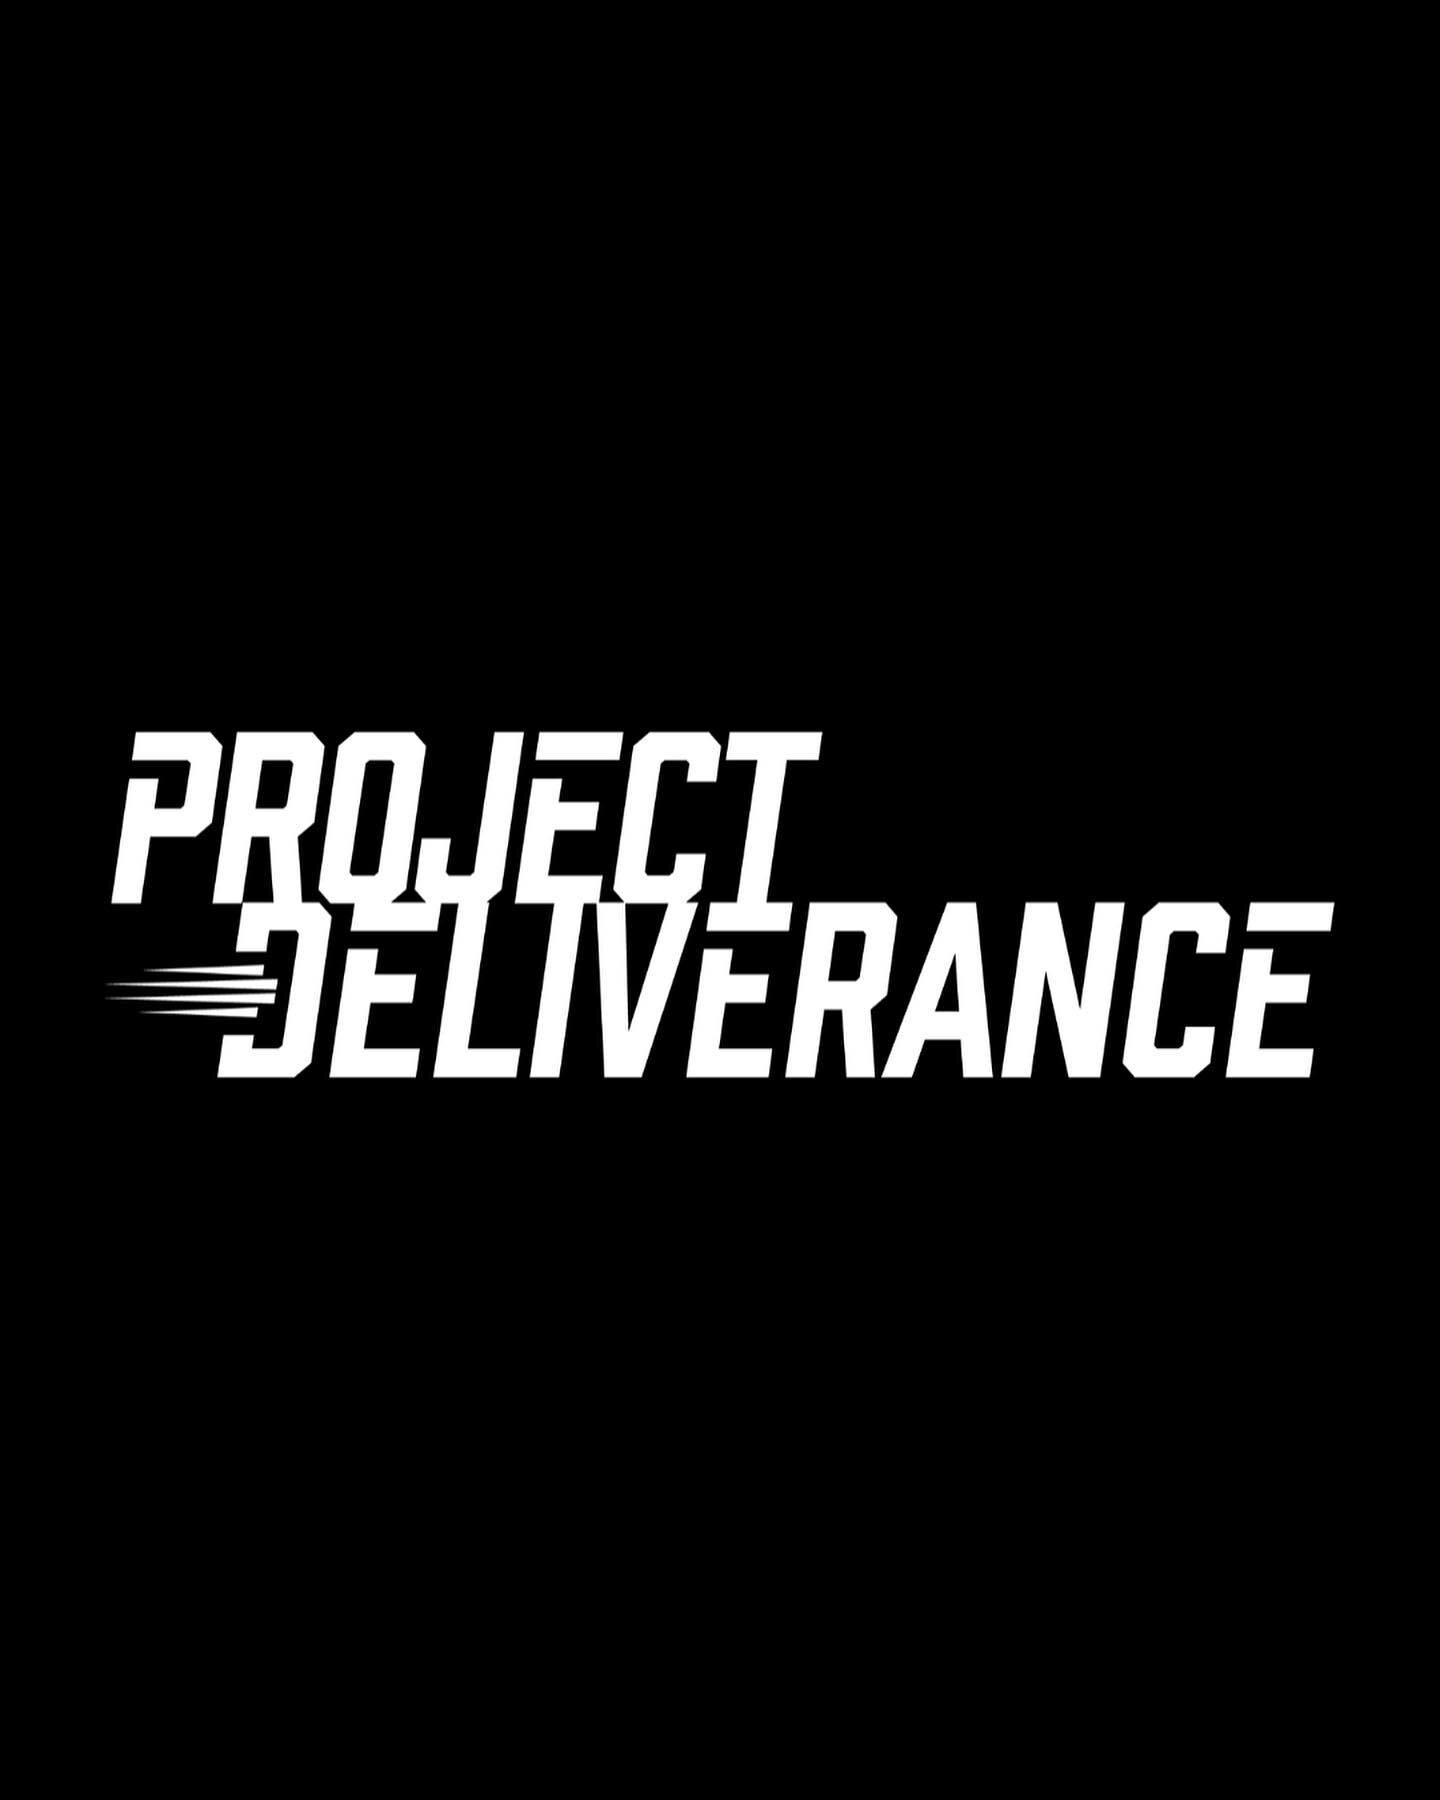 We&rsquo;ve got a fresh new logo and website. We&rsquo;ve got shirts and apparel on the way, so standby! LINK IN BIO for the website.
//
#ProjectDeliverance #GymJones #TheMindIsPrimary #Strength #Power #Aggression